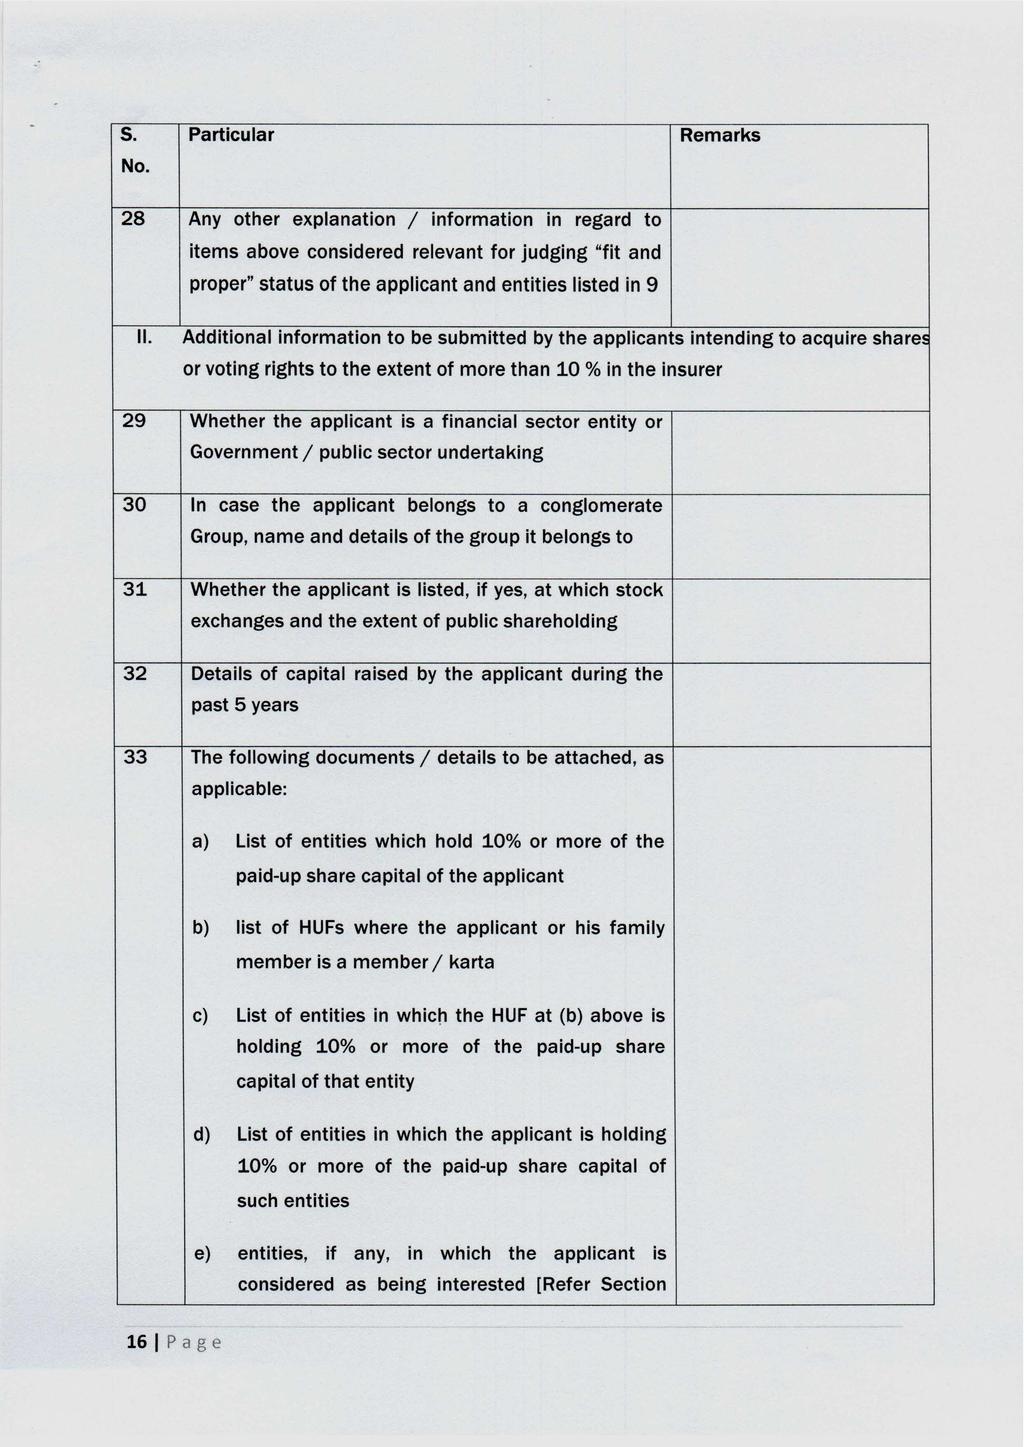 s. No. Particular Remarks 28 Any other explanation / information in regard to items above considered relevant for judging "fit and proper" status of the applicant and entities listed in 9 II.